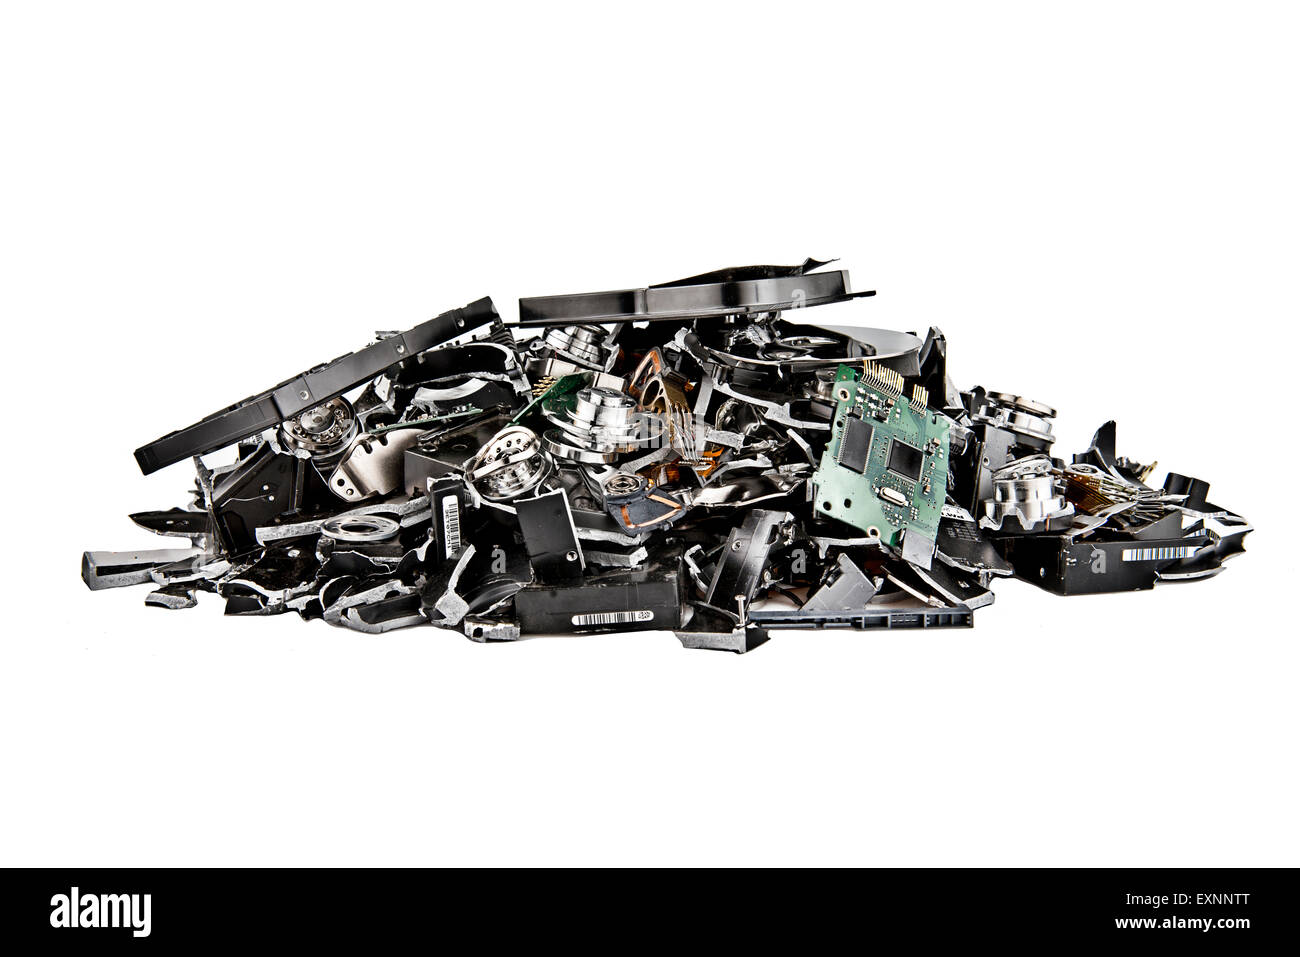 Image of a pile of destroyed hard drives Stock Photo - Alamy